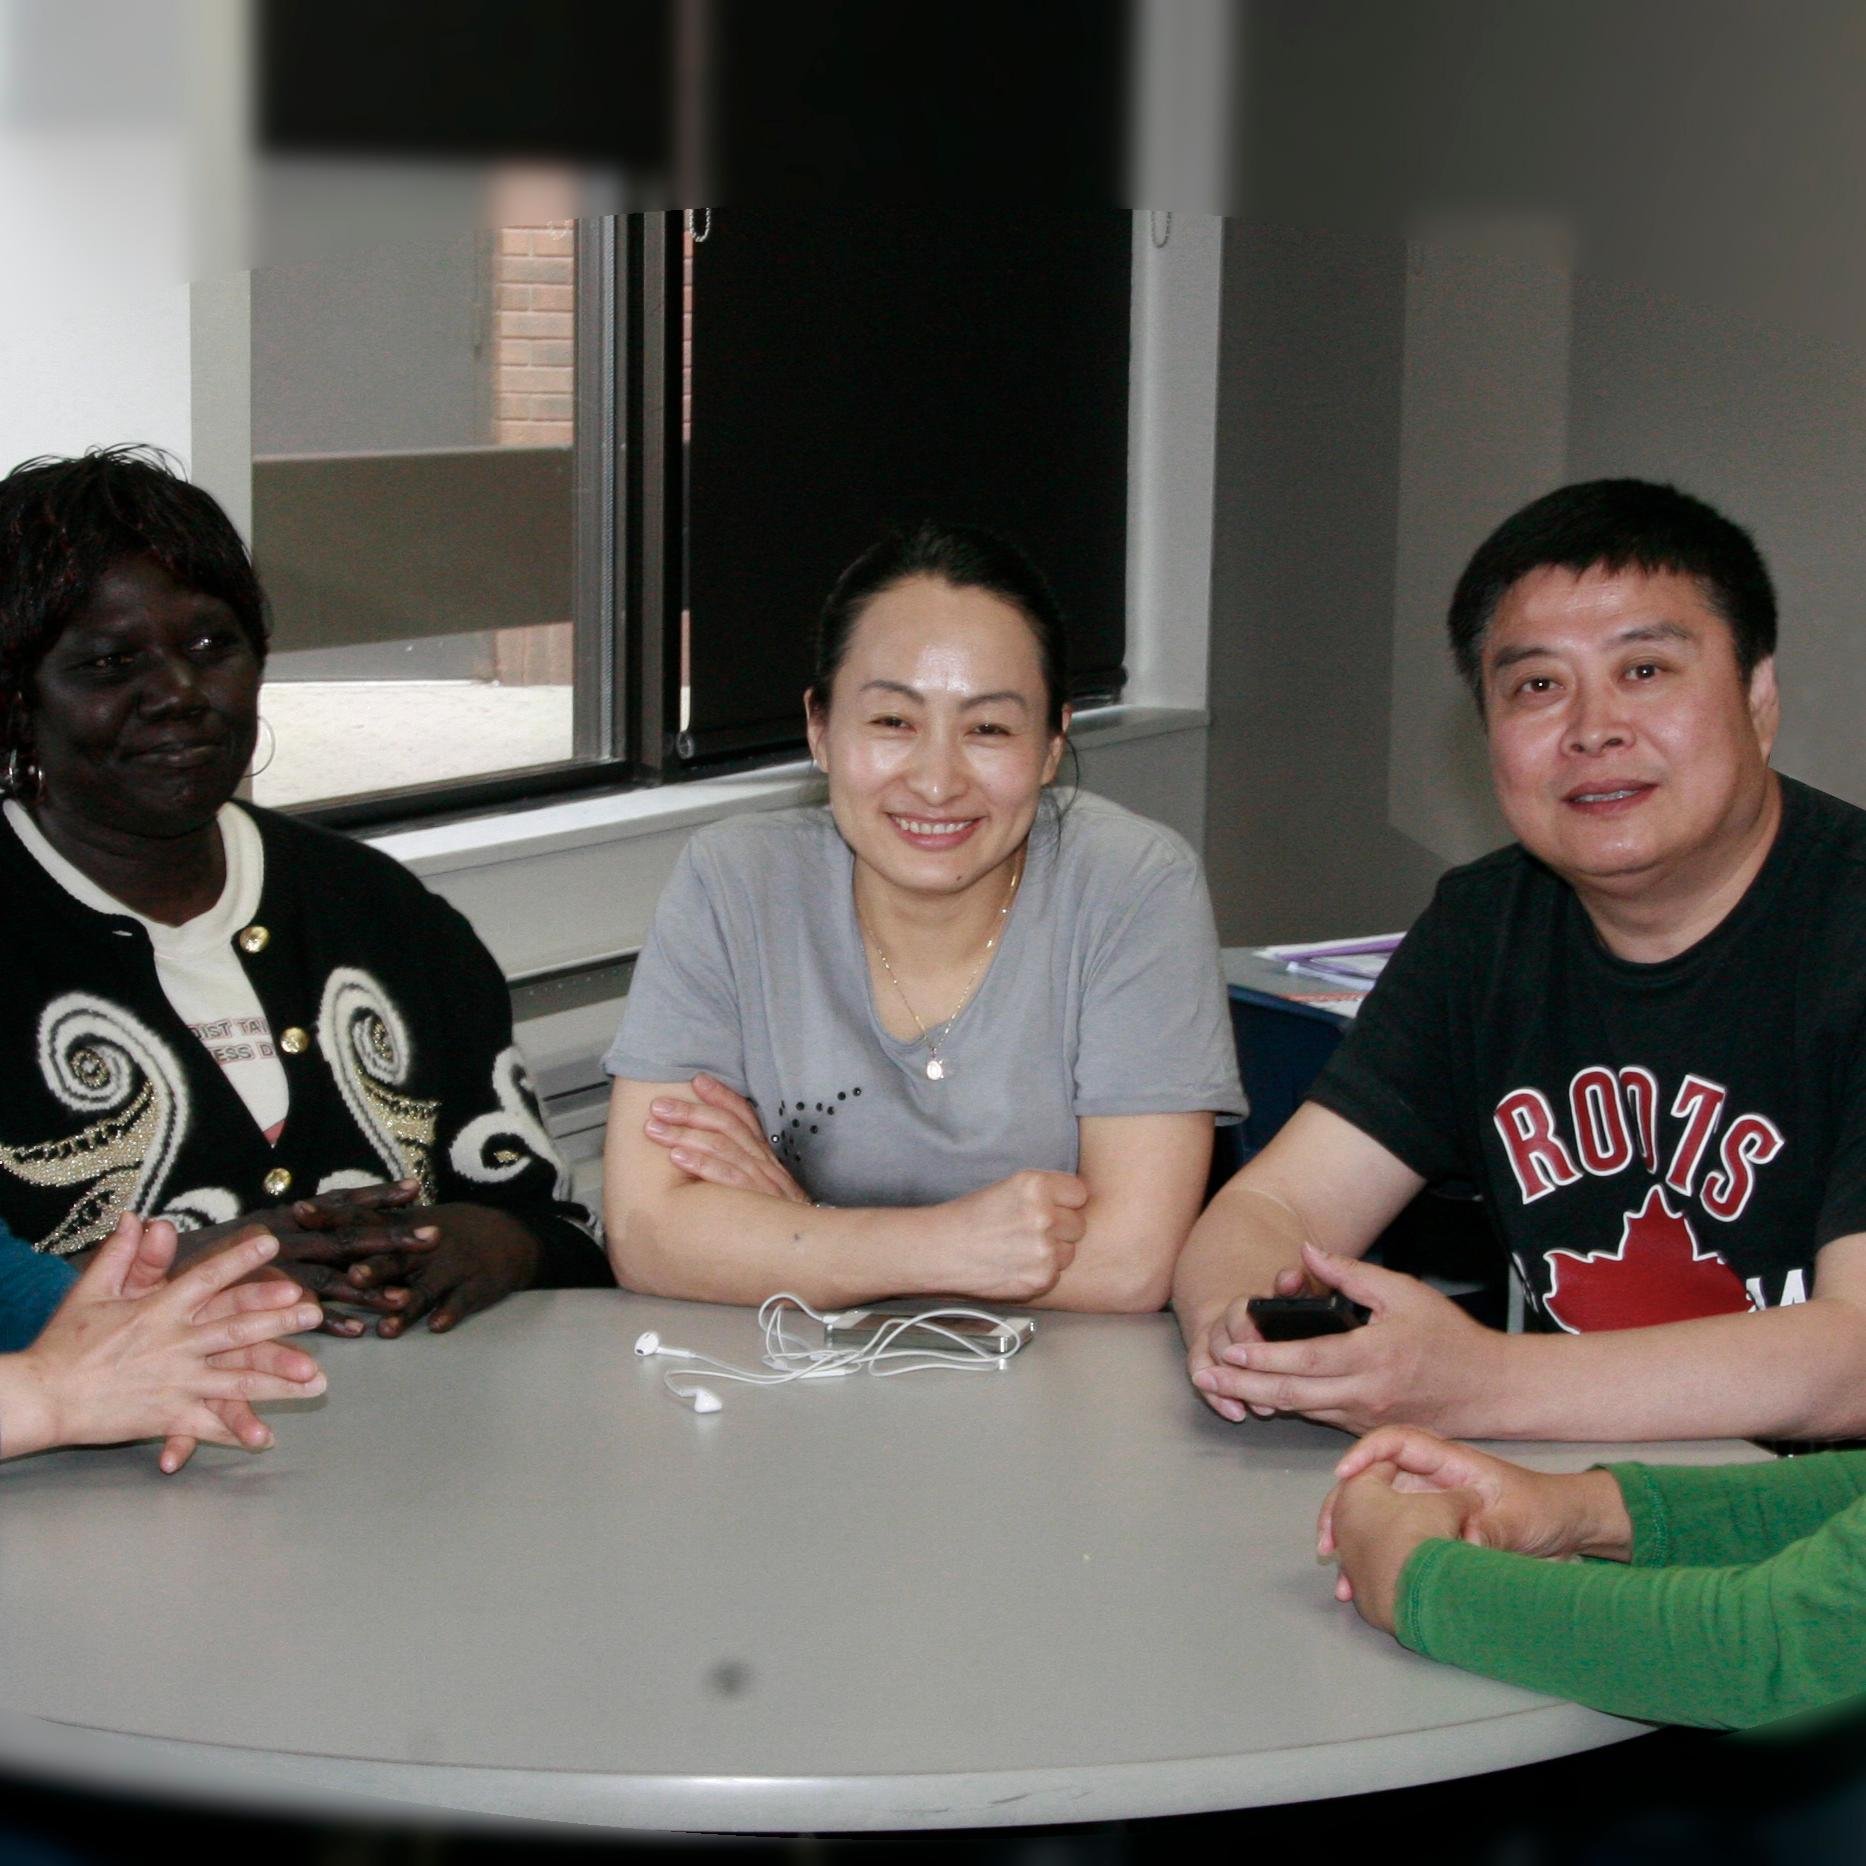 English Language Programs for Adults in Hamilton at three convenient locations: Hill Park, City Centre, and Parkway.